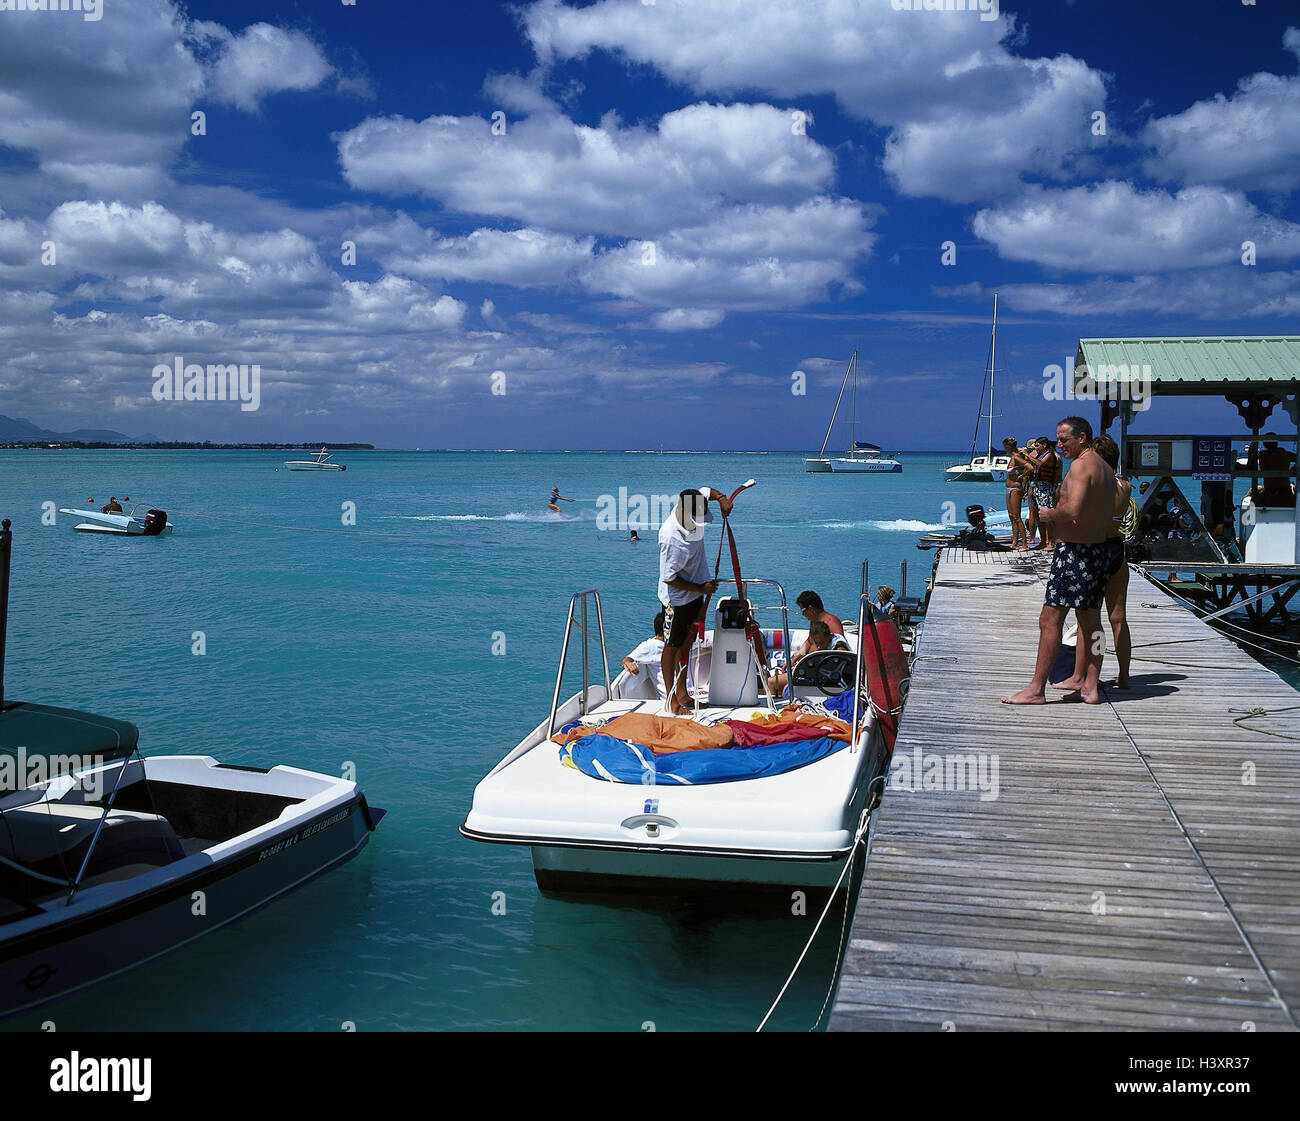 Mauritius, Flic en Flac Beach, bridge, boots, invest, tourists, Indian  ocean, Maskarenen, island state, island, the west, sea, landing stage,  vacationer, summer vacation, beach holiday, tourism, leisure time offer,  water-ski driving, sport,